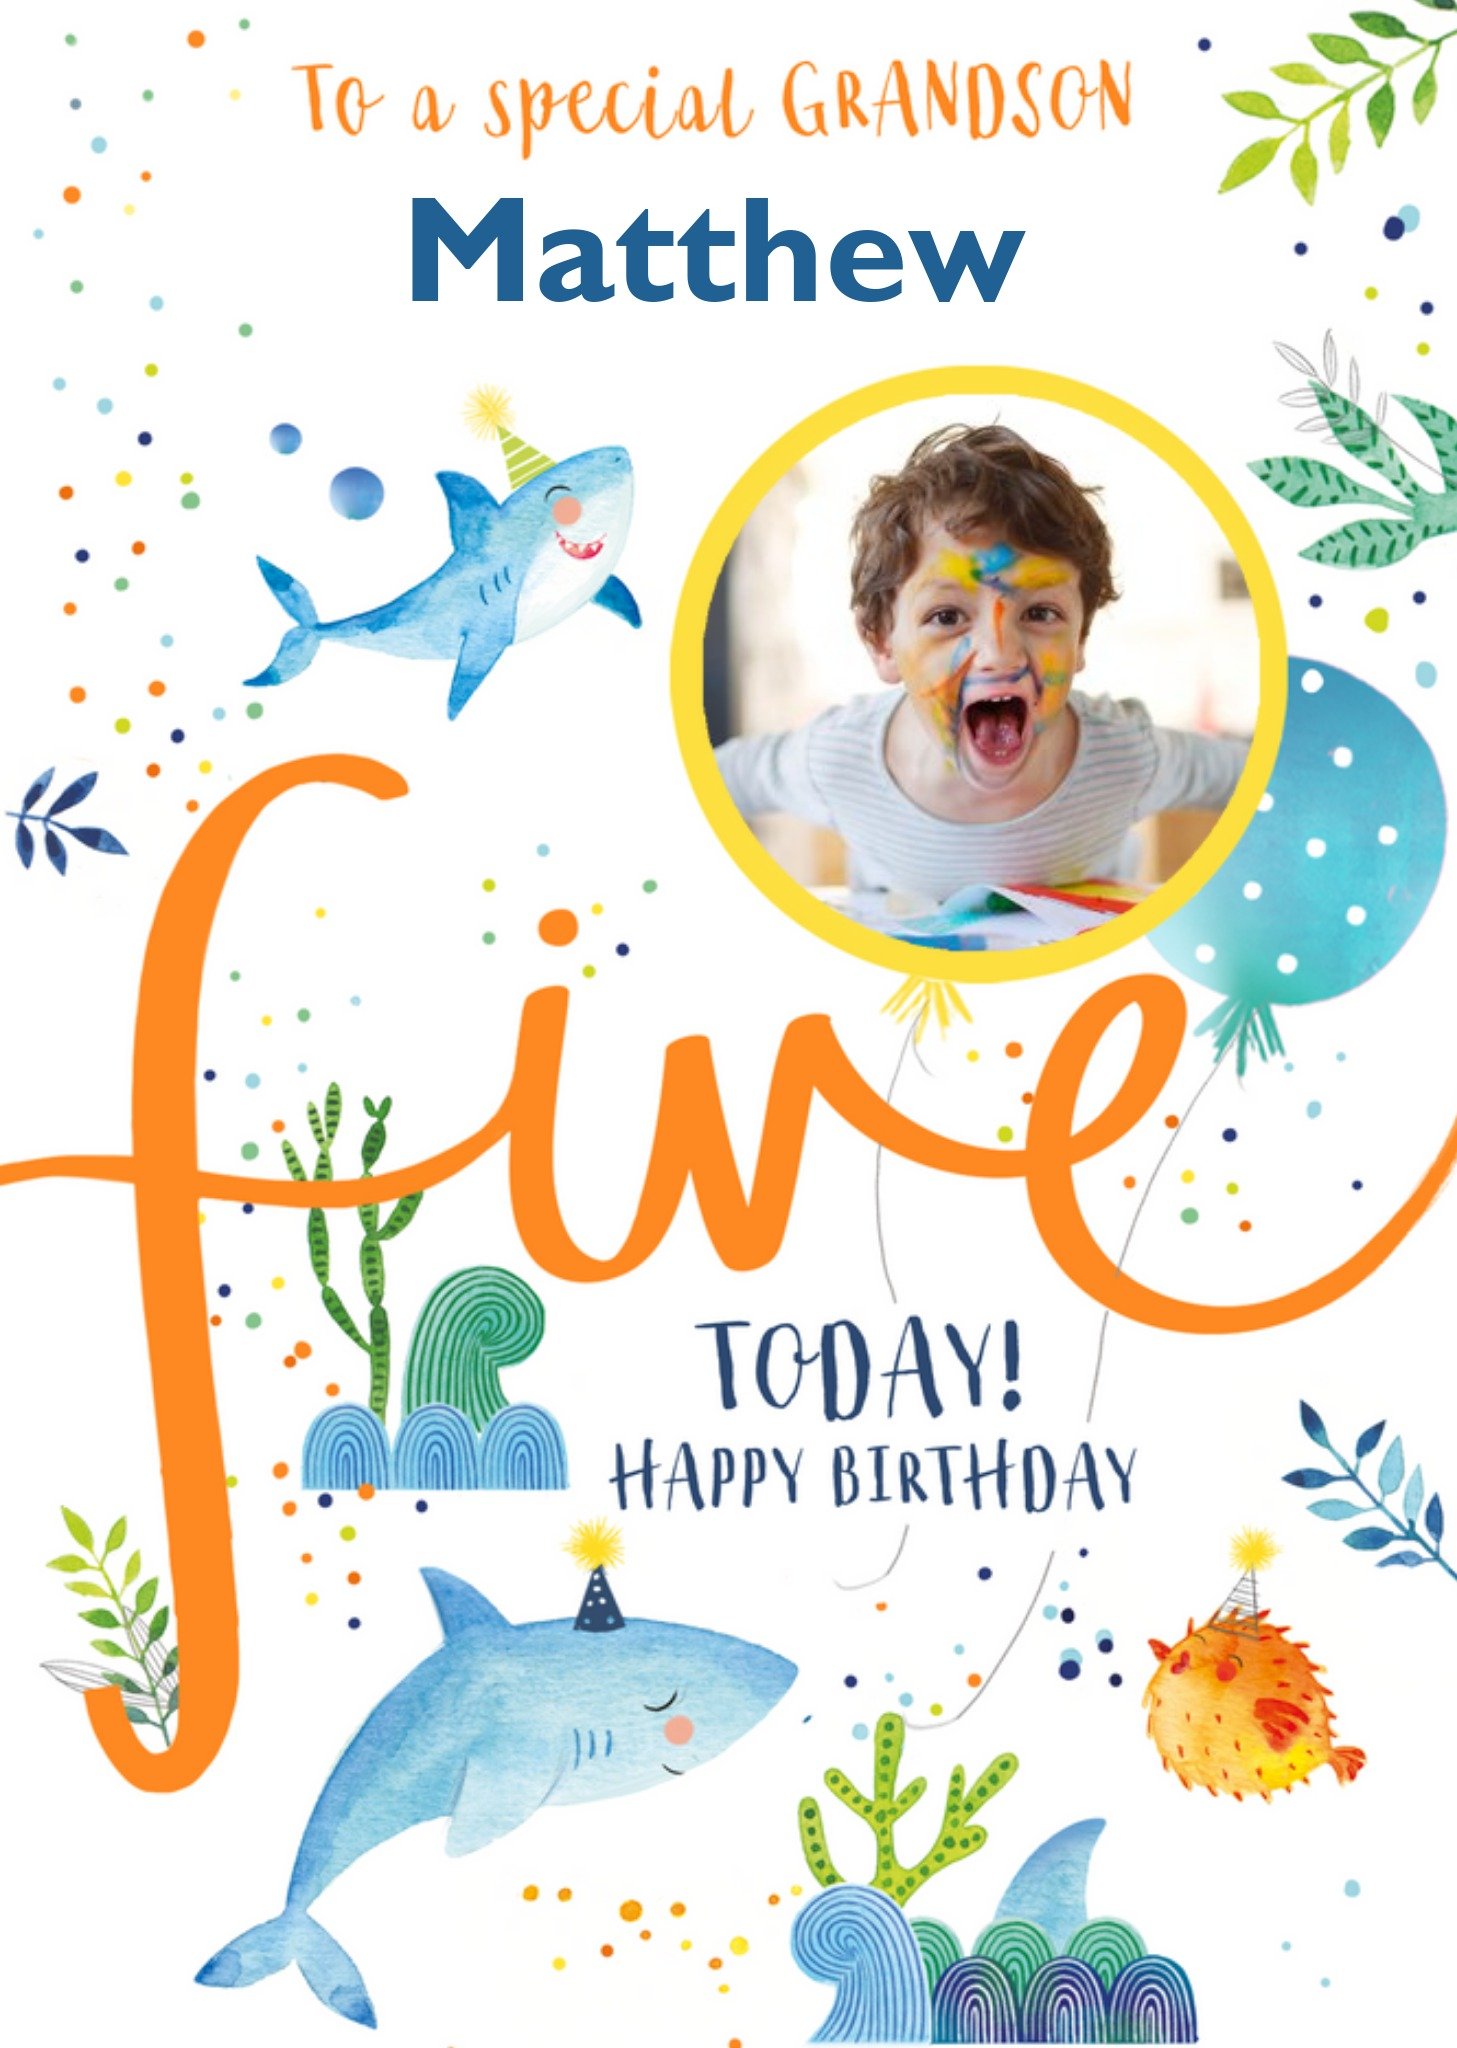 Ling Design Underwater Themed Illustration With Sharks In Party Hats Grandson's Fifth Birthday Photo